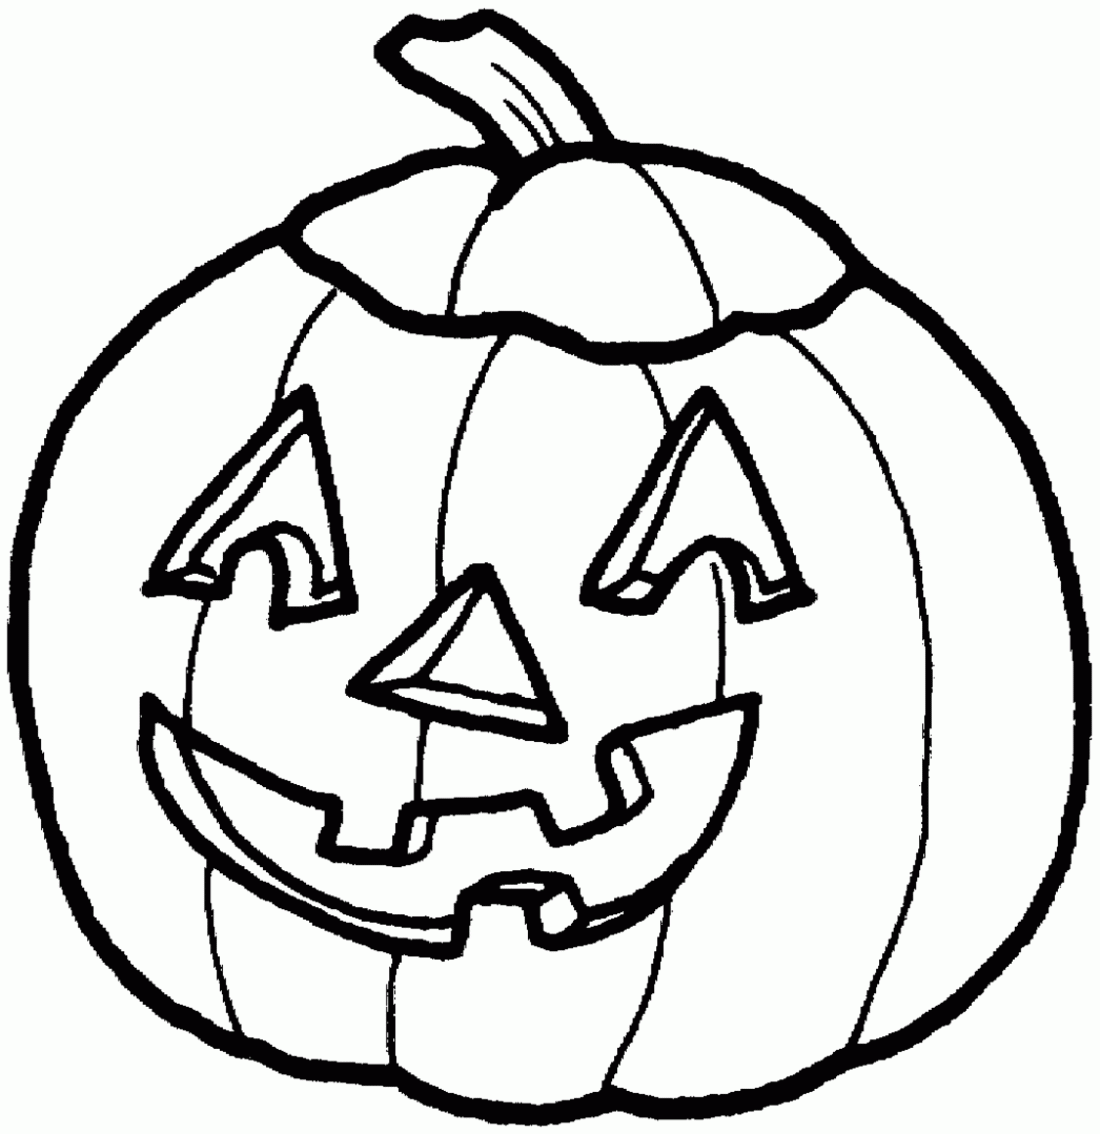 picture of pumpkin to color simple pumpkin coloring page free printable coloring pages pumpkin picture color of to 